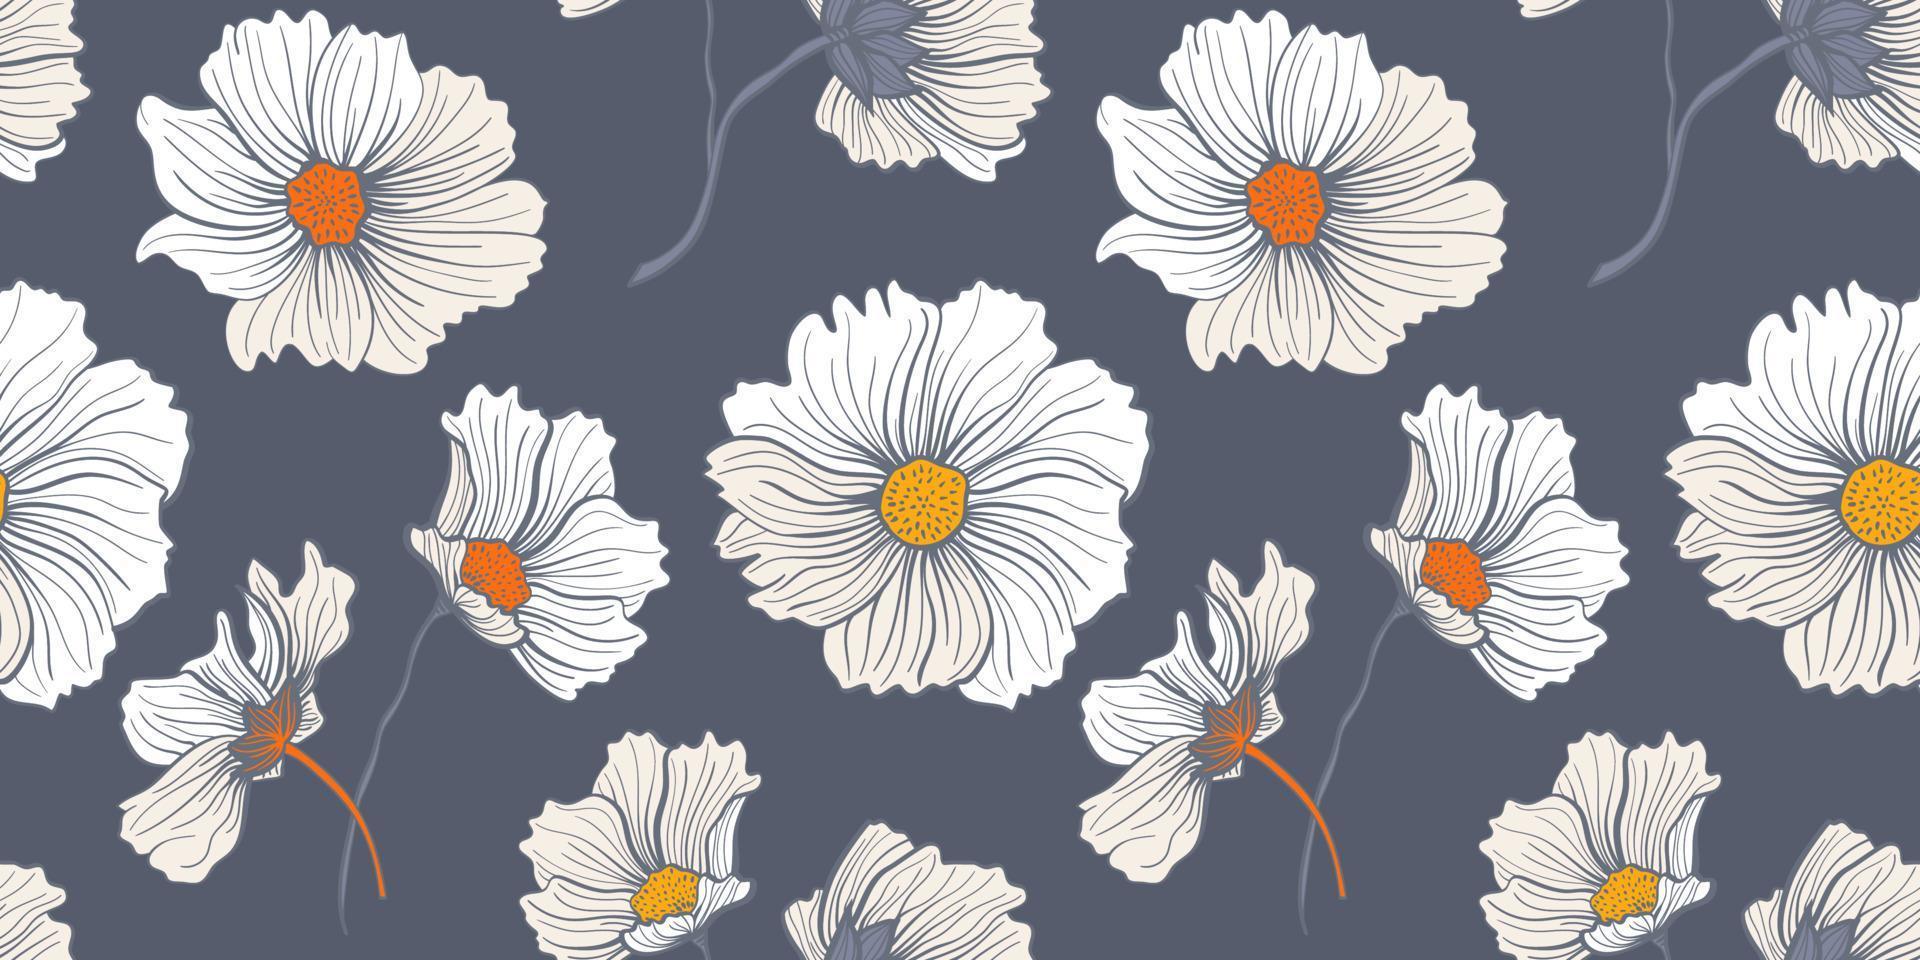 Summer flowers meadow. Seamless pattern with white wild poppies and daisies on dark gray background vector